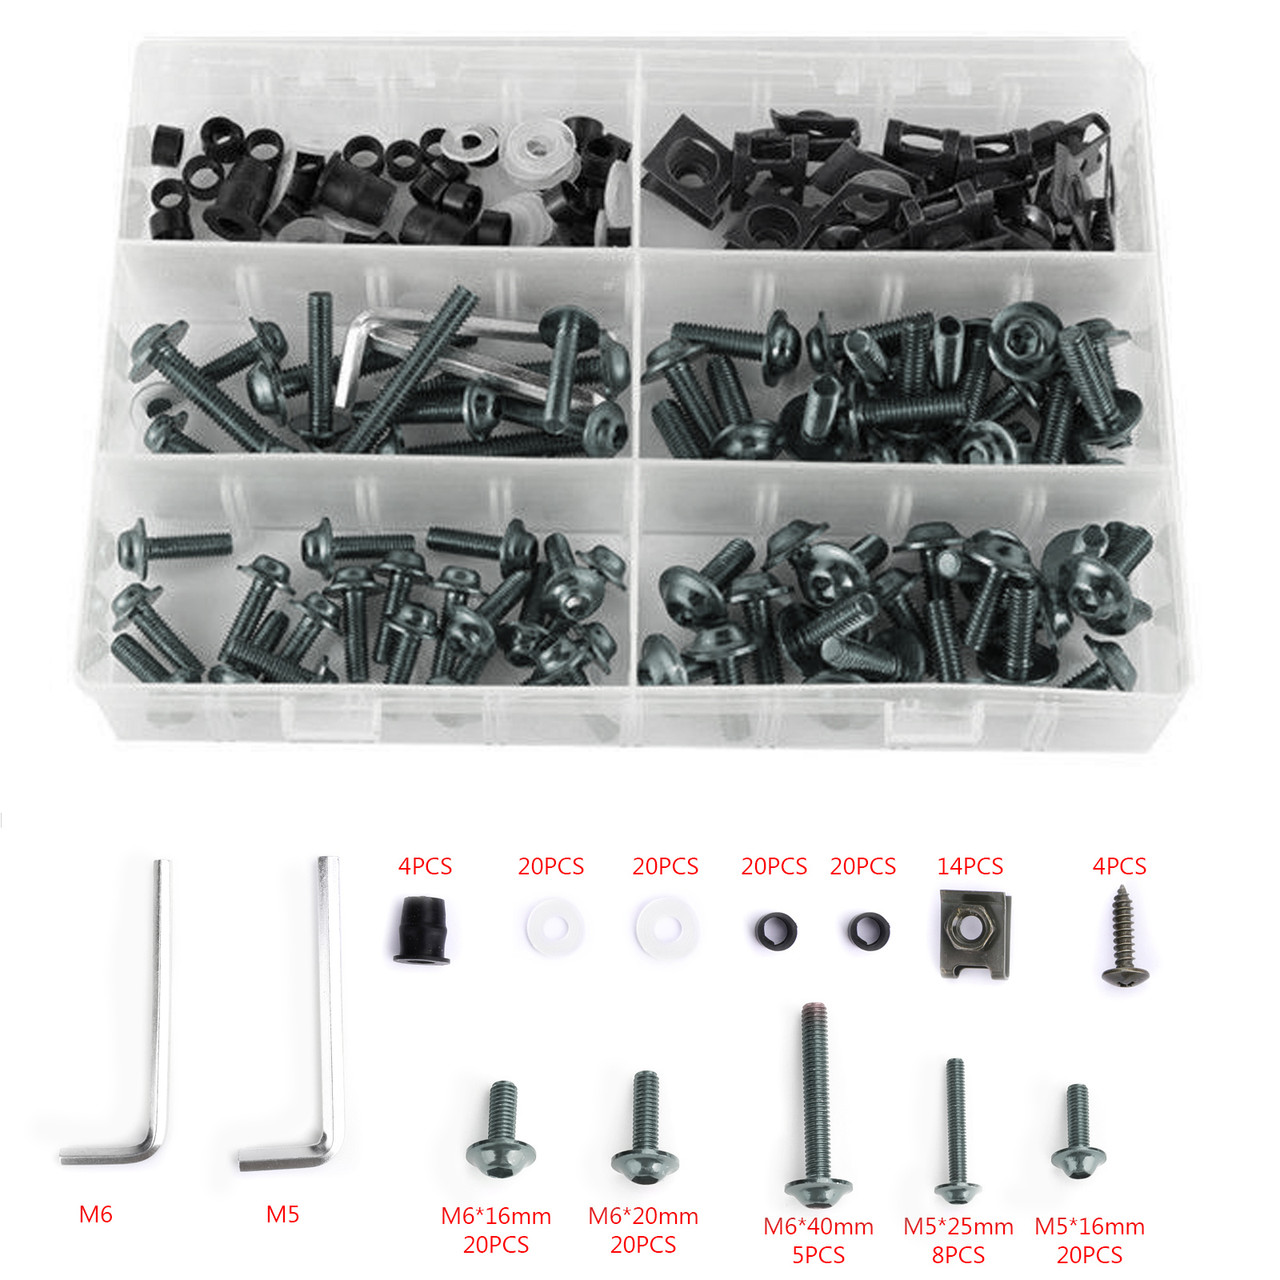 177PCS Motorcycle Sportbike Windscreen Fairing Bolts Kit Fastener Clips Screws Universal Fit For Honda Motorcycle/Motorbikes/Sportbikes/Scooter/Streetbikes TIT~BC1